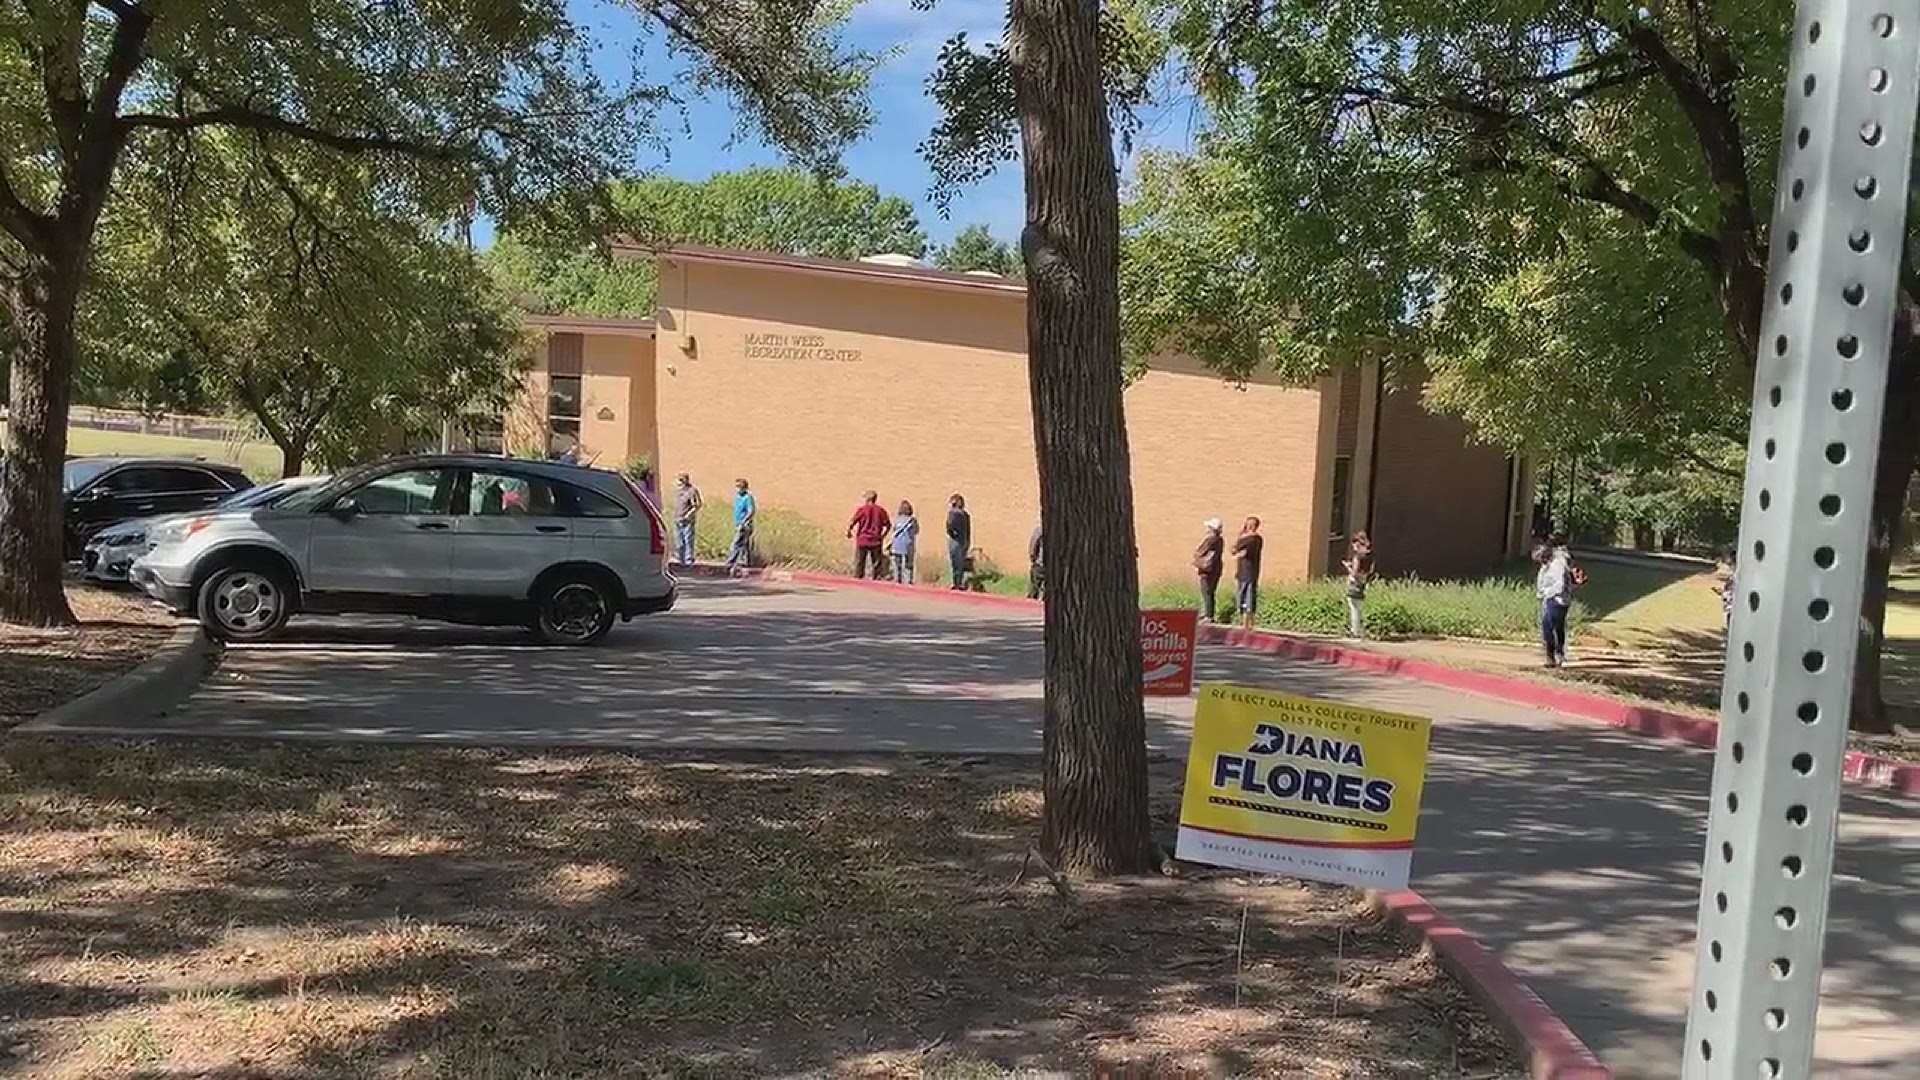 Early voting at Martin Weiss Recreation Center in Dallas' Oak Cliff neighborhood
Credit: Rosa E.